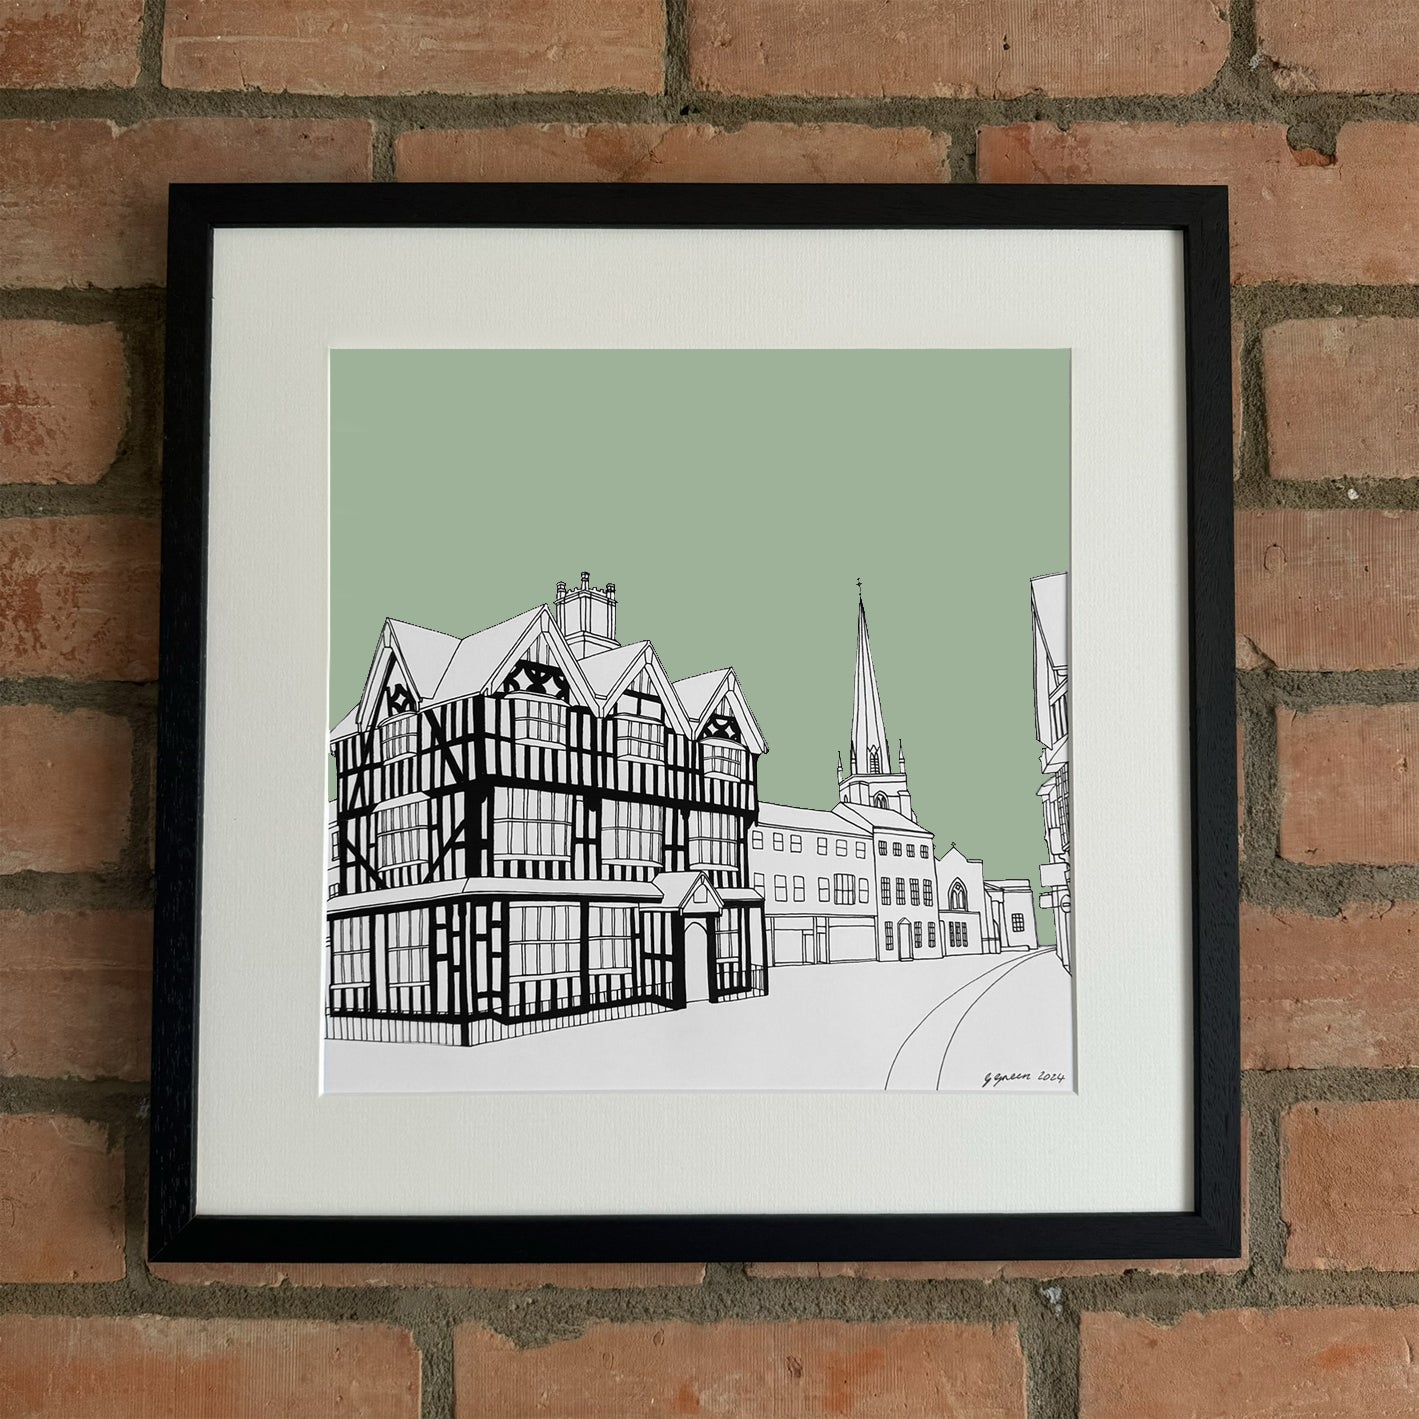 Hereford Giclee Print 30cm x 30cm (Limited Edition)